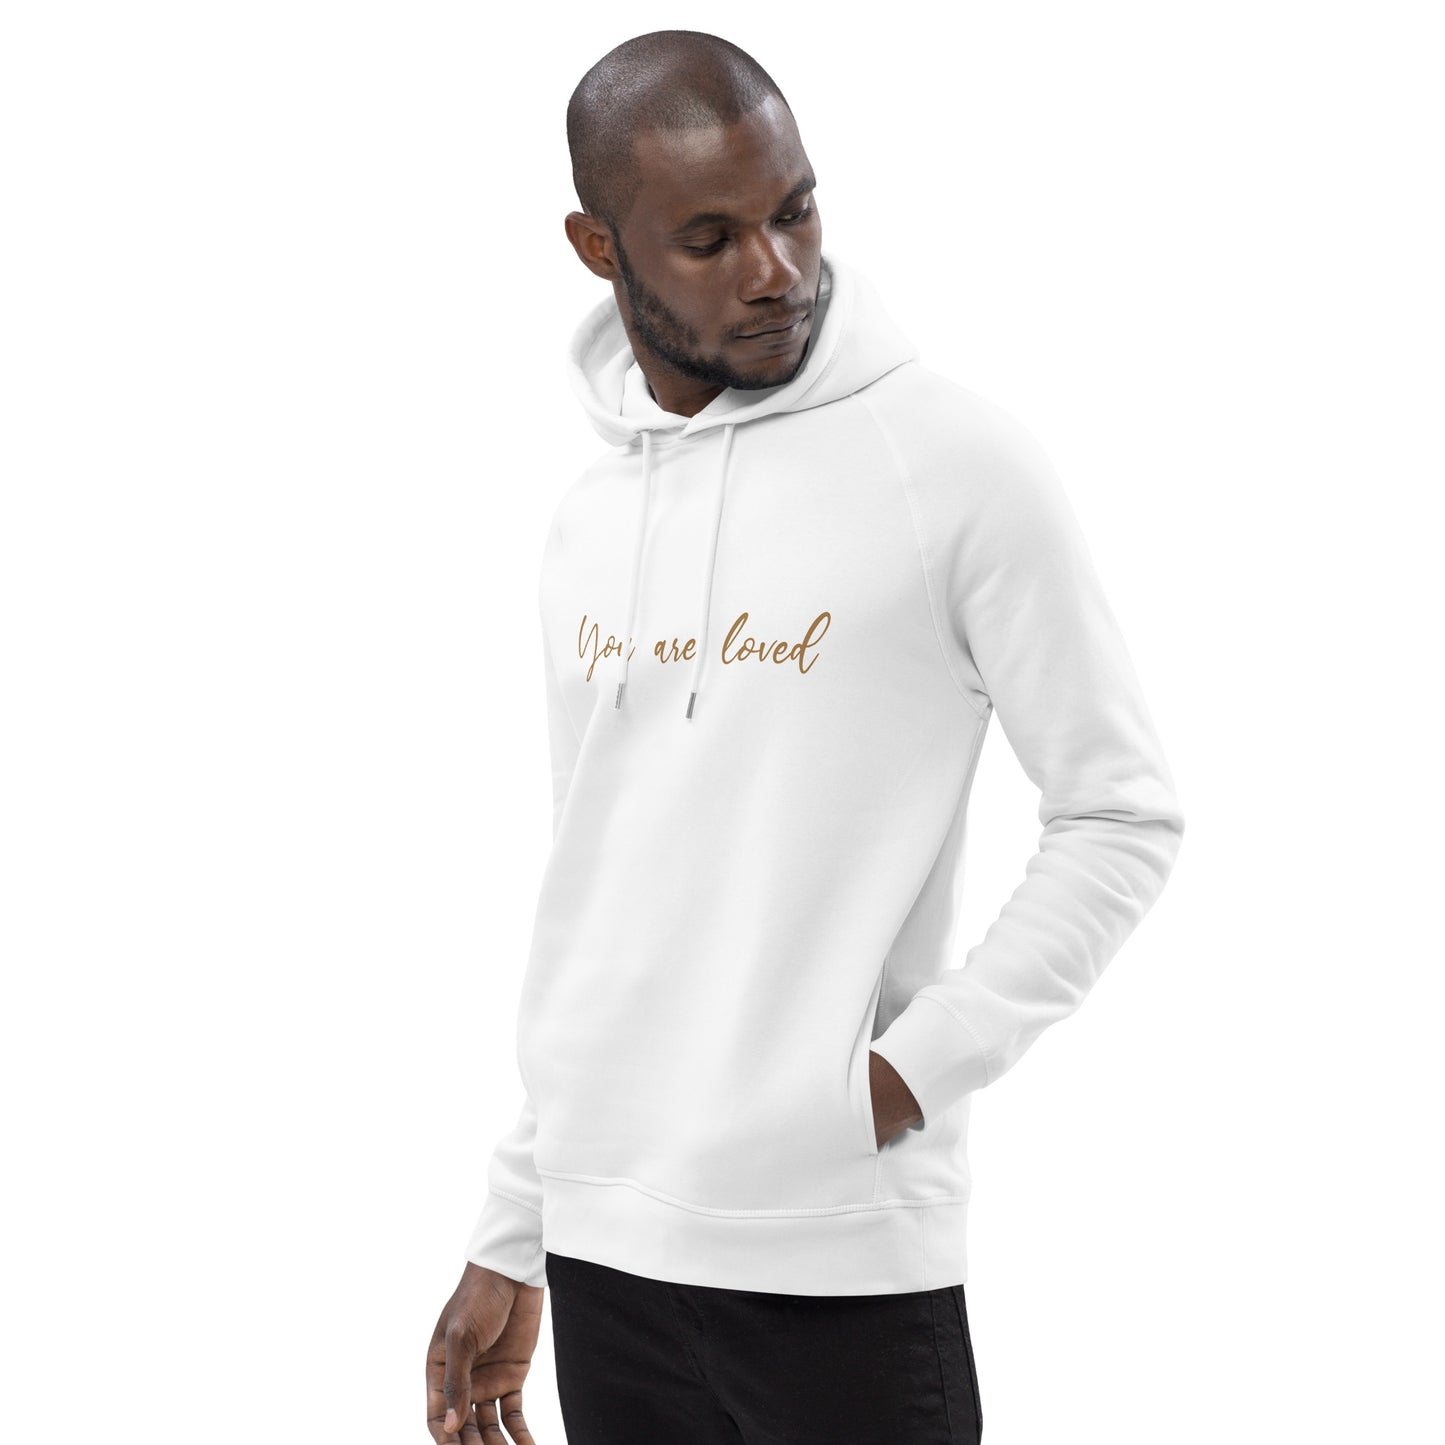 You Are Loved Men's Organic Cotton Hoodie